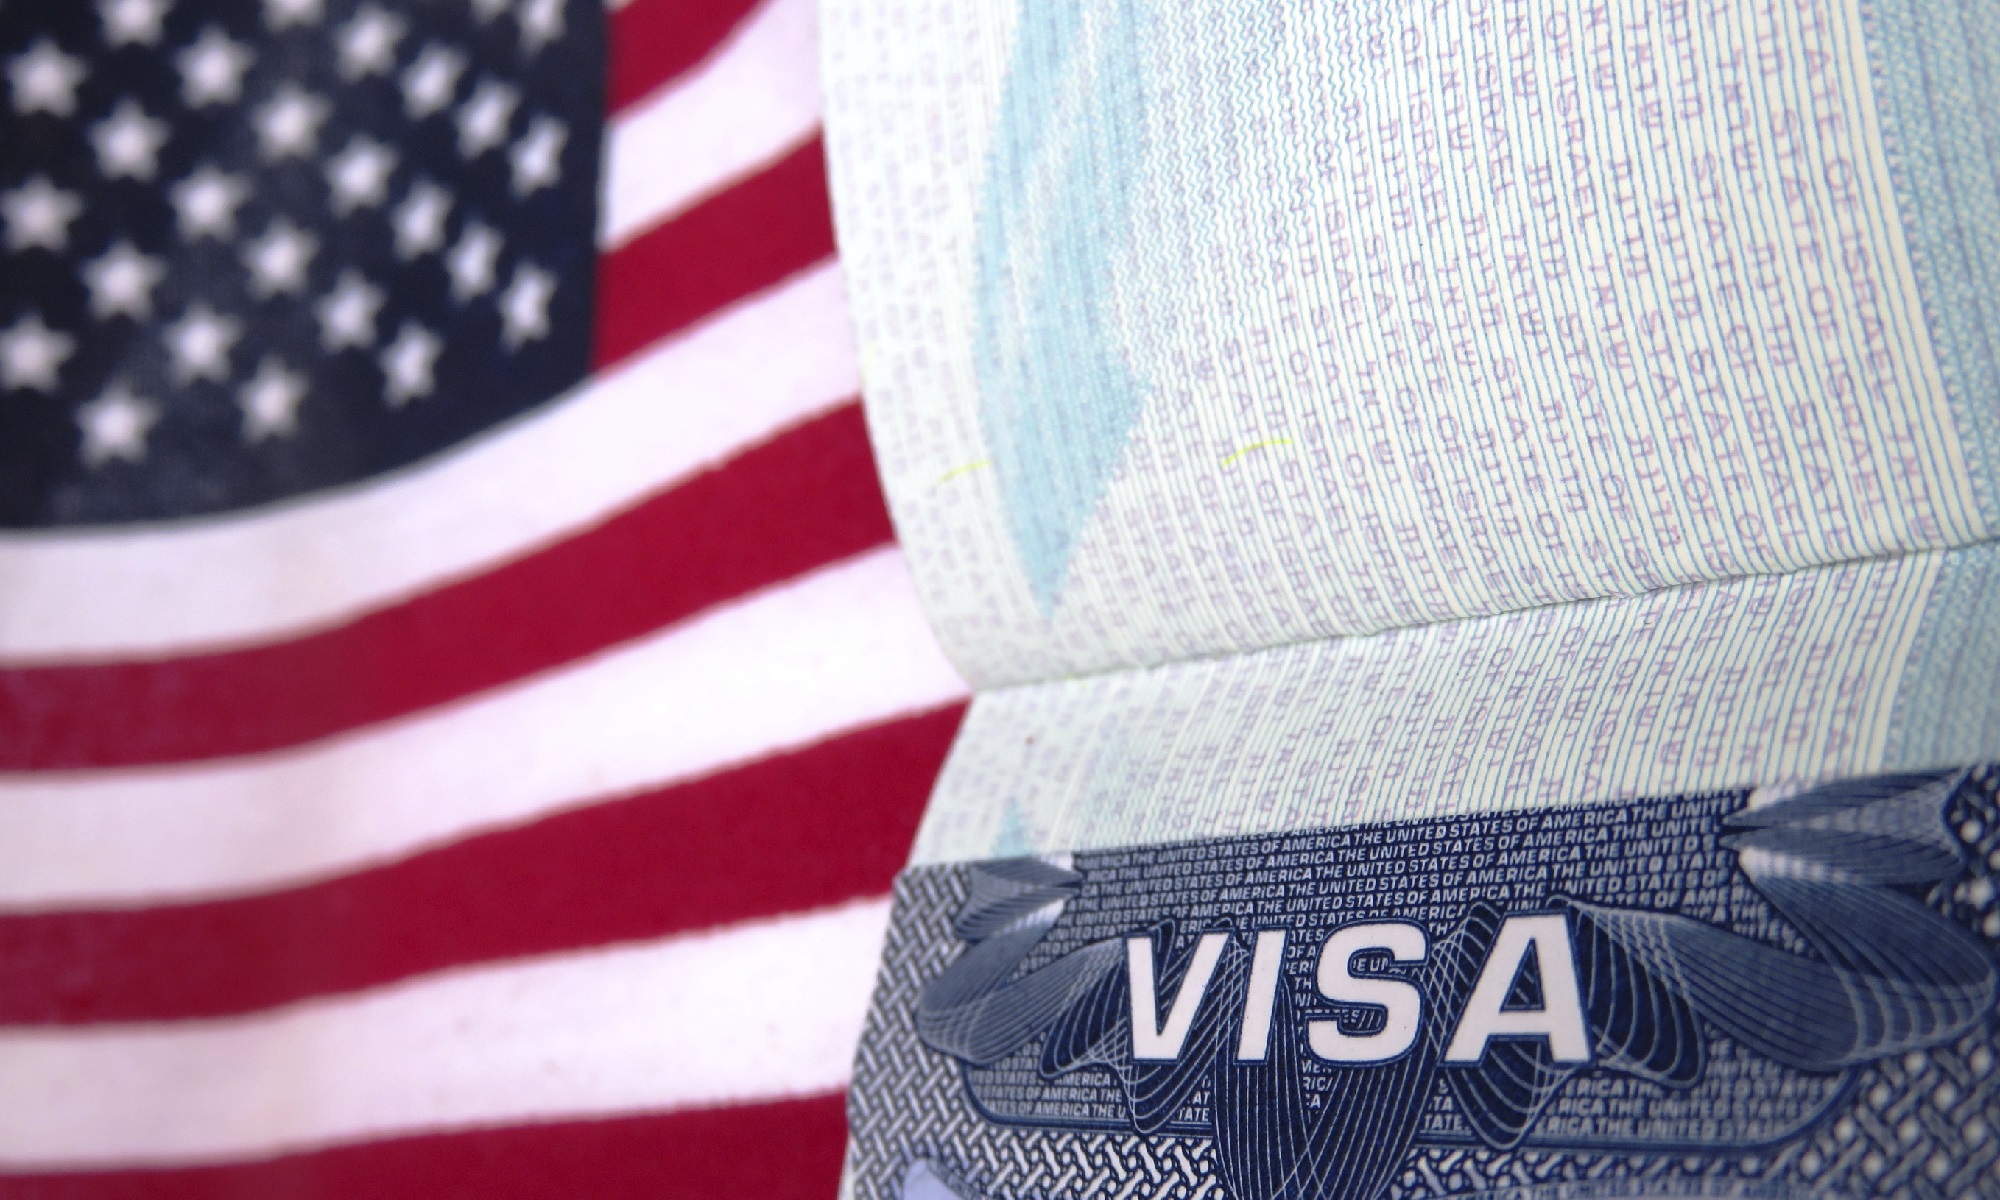 USA: about the P visa